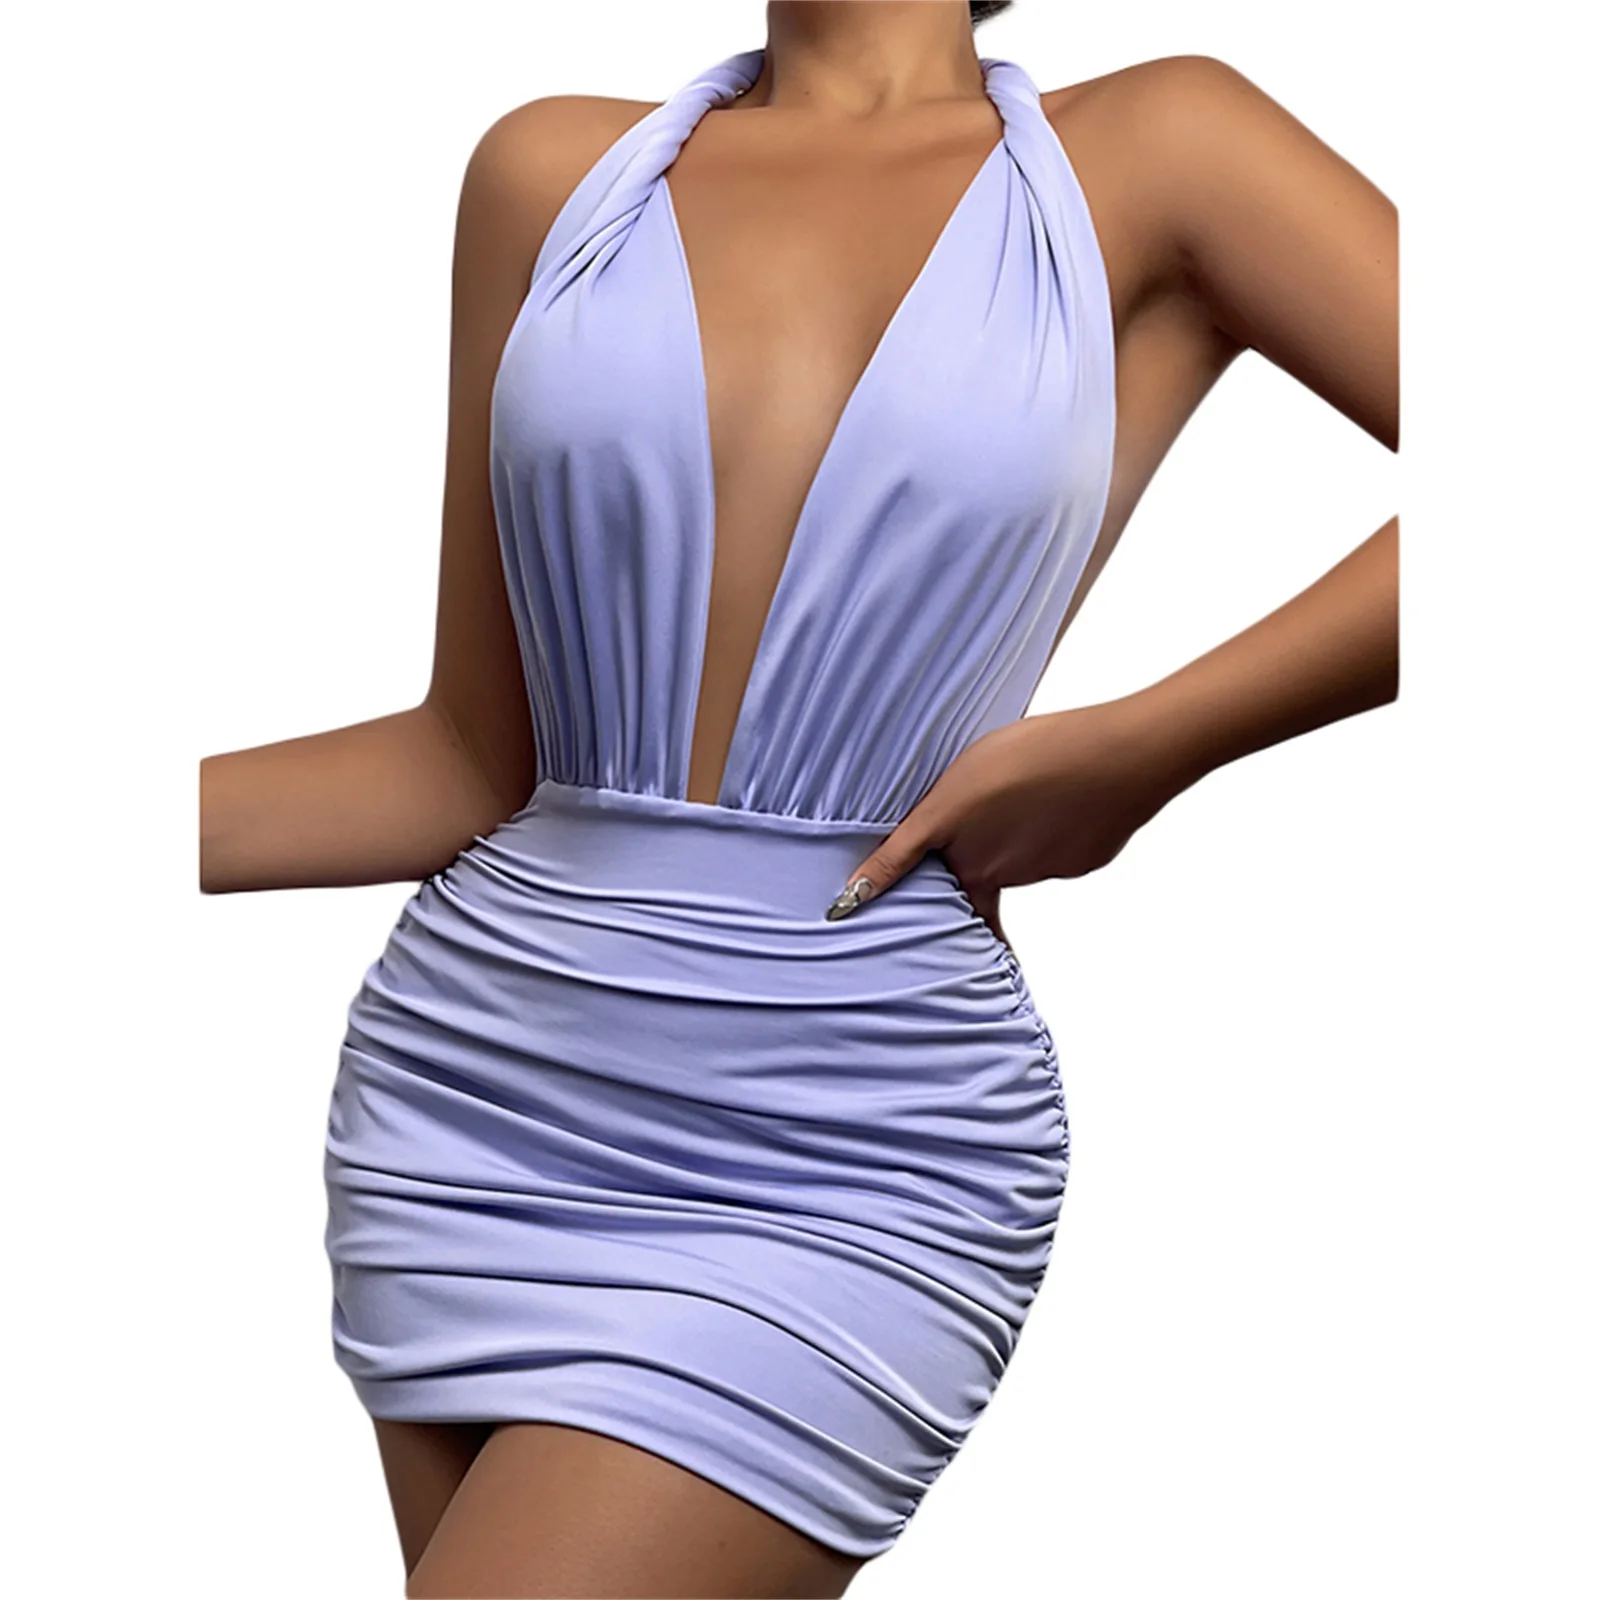 2022 Fashion Women Sexy Backless Ruched Bodycon Slip Dress Sleeveless Low Cut Tie Up Halter Mini Dress Club Evening Party Dress wedding guest dresses